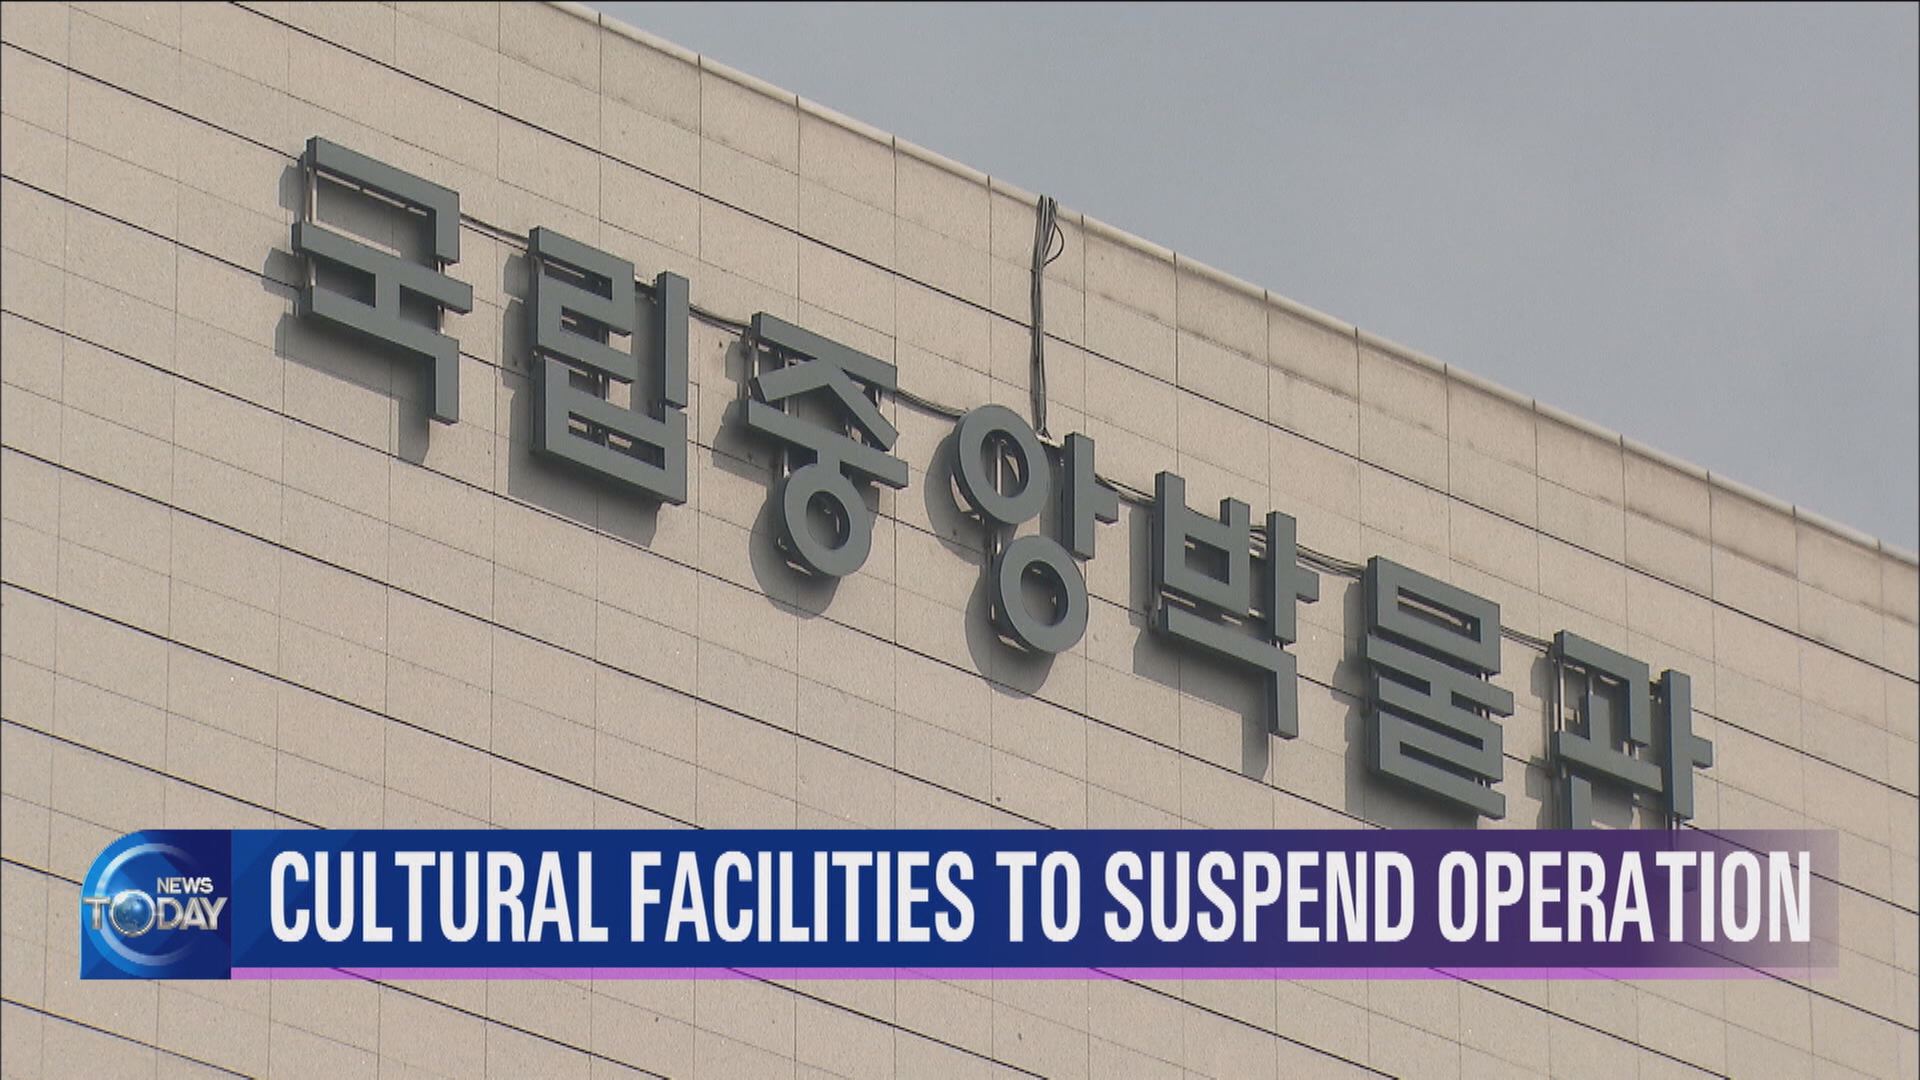 CULTURAL FACILITIES TO SUSPEND OPERATION